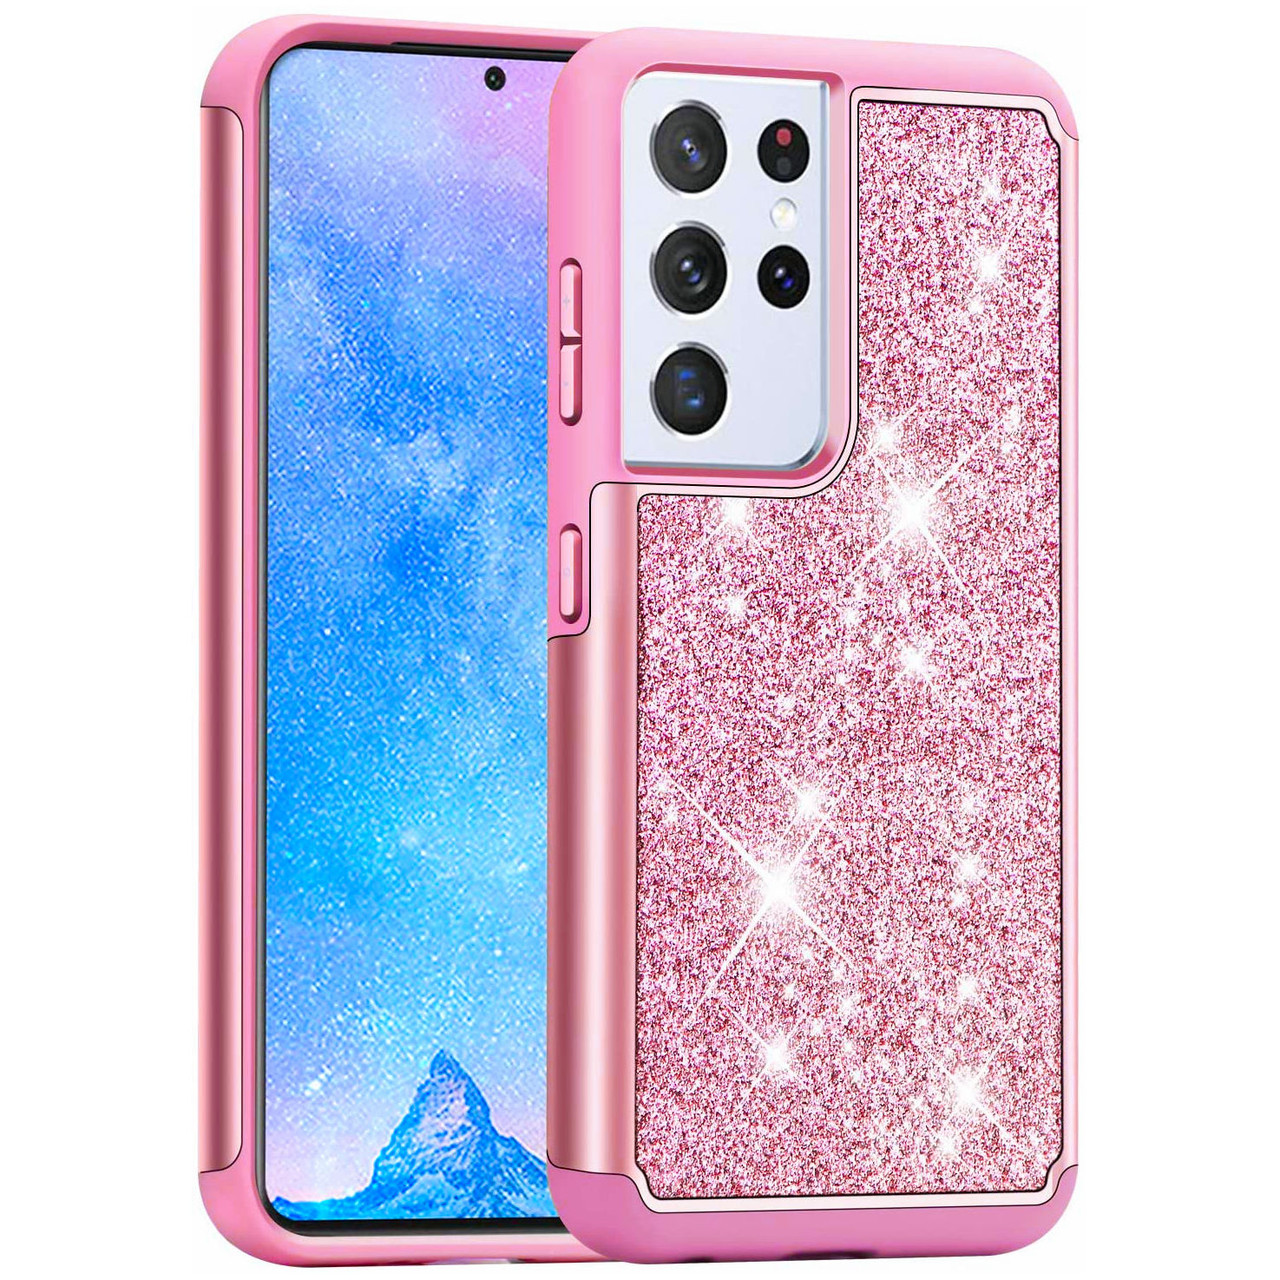 Totaldefense Glitter Hybrid Case For Samsung Galaxy S21 Ultra 5g Pink Hd Accessory